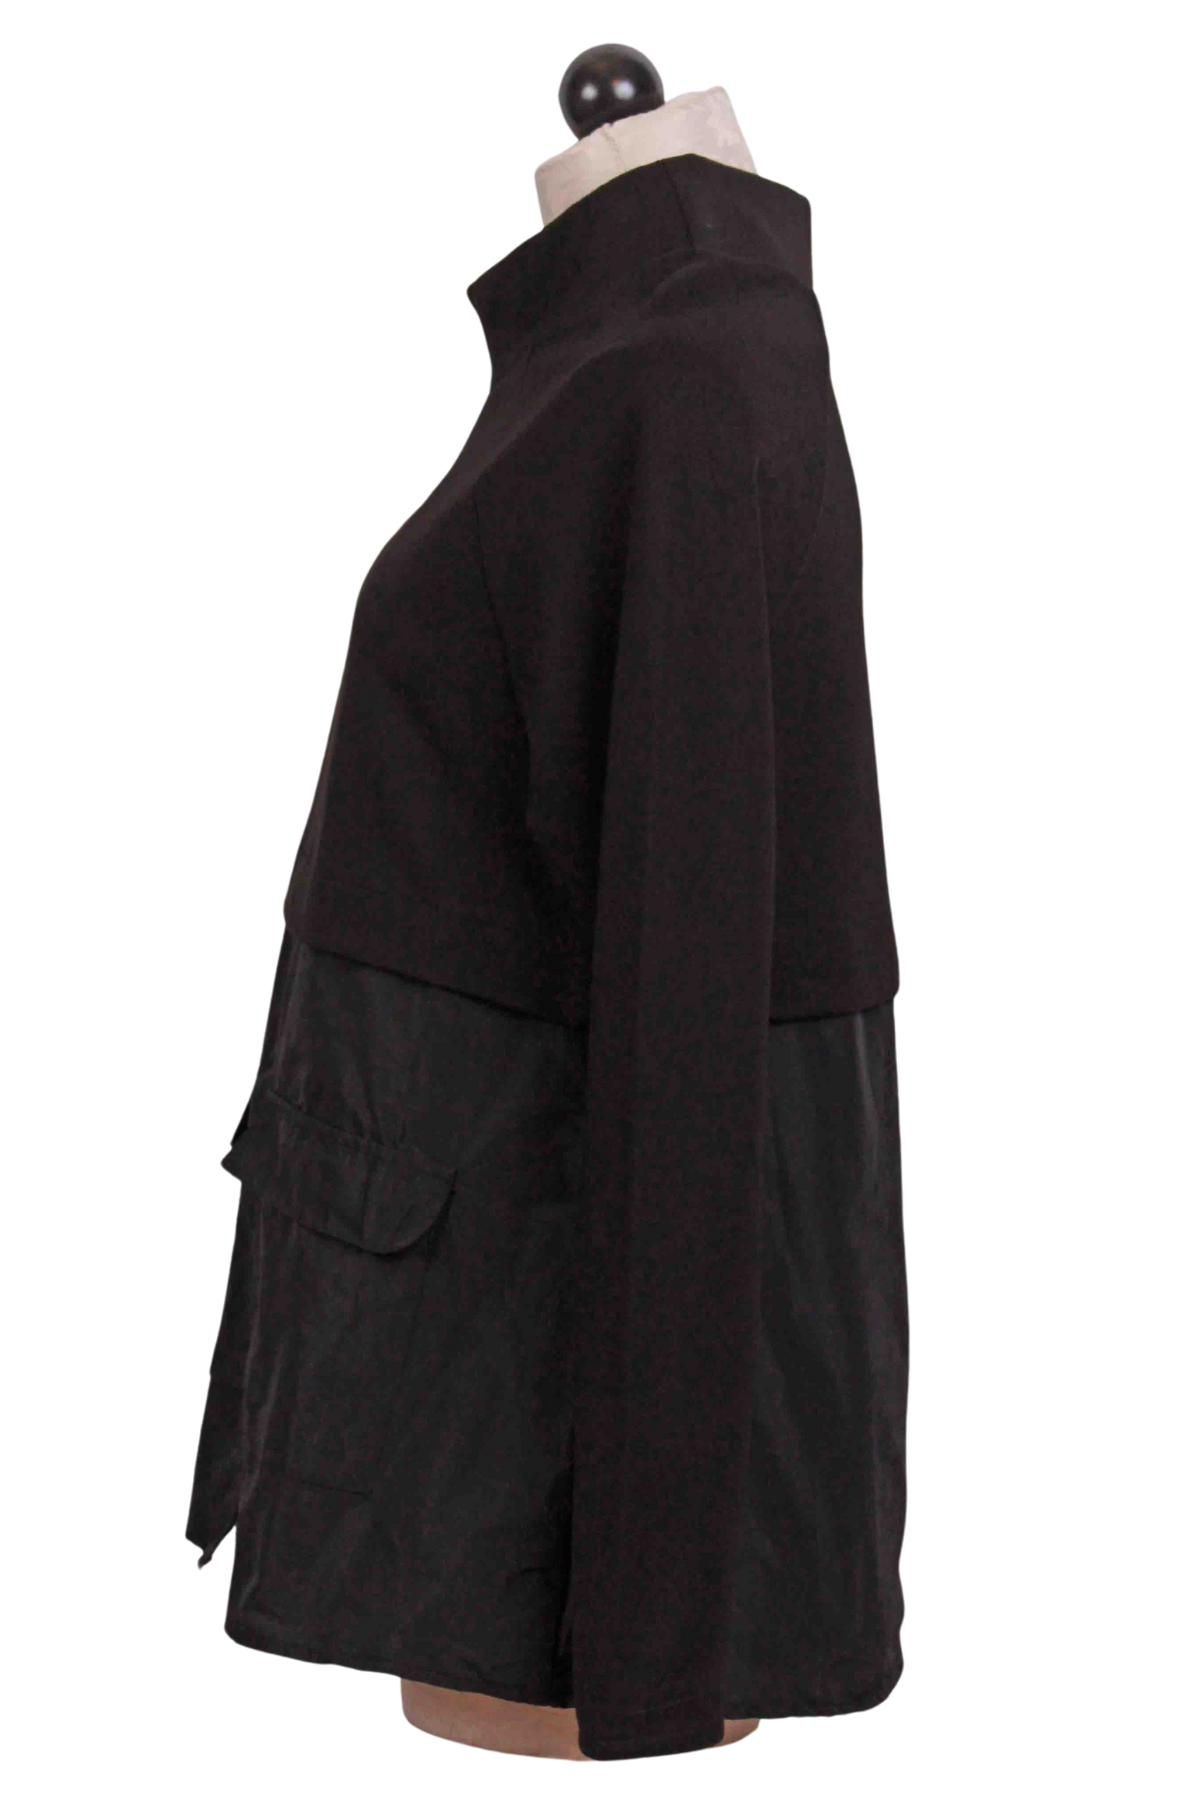 side view of black Funnel Neck Robin Tunic Top by Kozan